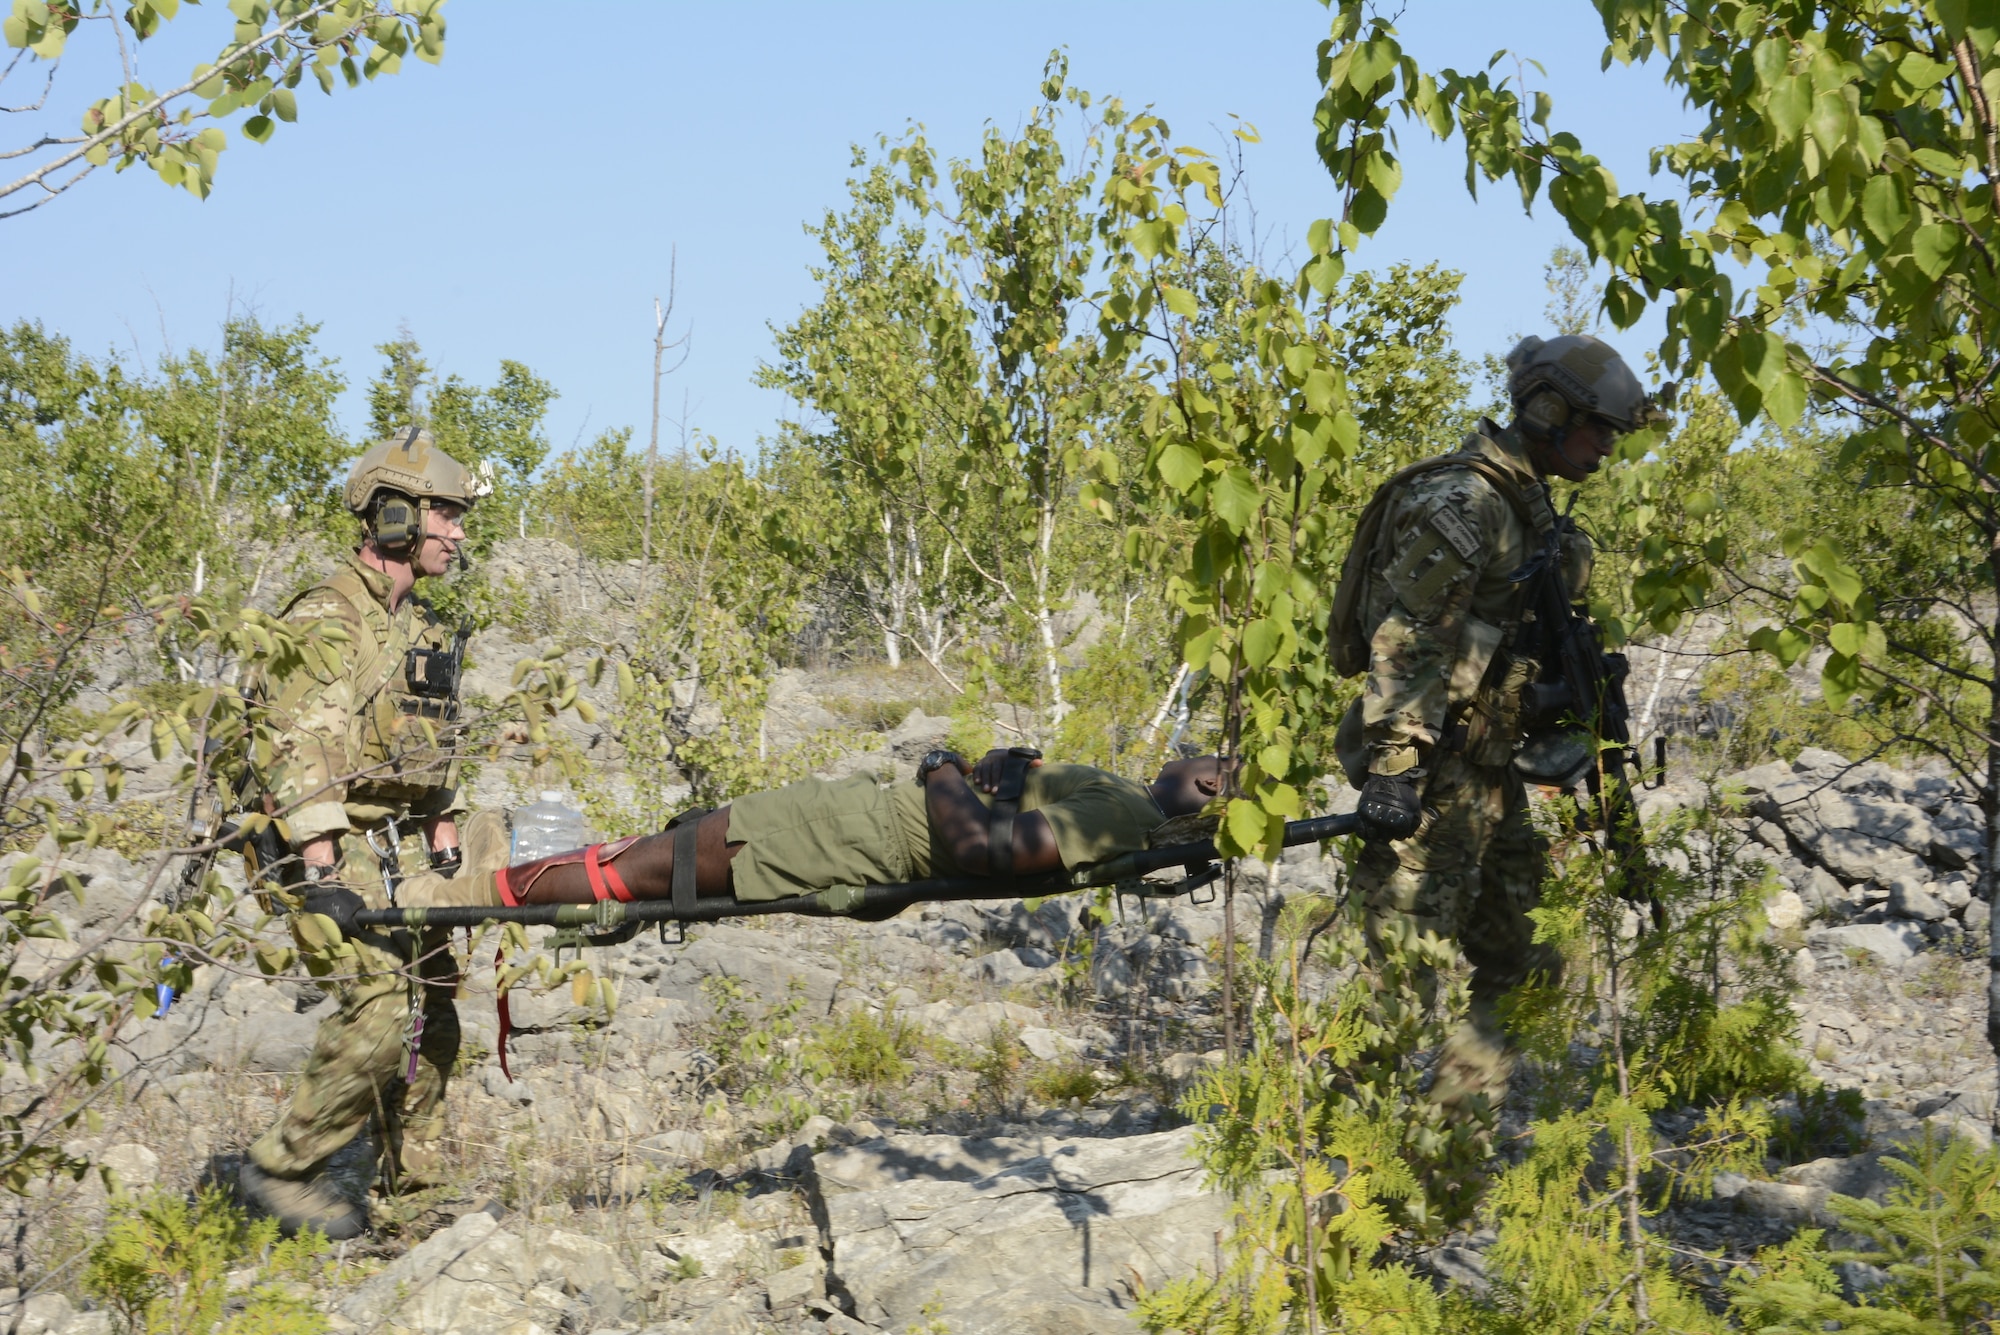 Pararescue specialists from the 103rd Pararescue Squadron, Westhampton Beach, New York, execute a rescue training mission for Northern Strike 18, Aug. 10, 2018. Northern Strike 18 is a National Guard Bureau-sponsored exercise uniting service members from many states, multiple service branches and a number of coalition countries during the first three weeks of August 2018 at the Camp Grayling Joint Maneuver Training Center and the Alpena Combat Readiness Training Center, both located in northern Michigan and operated by the Michigan National Guard. The accredited Joint National Training Capabilities exercise demonstrates the Michigan National Guard's ability to provide accessible, readiness-building opportunities for military units from all service branches to achieve and sustain proficiency in conducting mission command, air, sea, and ground maneuver integration, together with the synchronization of fires in a joint, multinational, decisive action environment. (Air National Guard photo by Airman 1st Class Tiffany Clark)